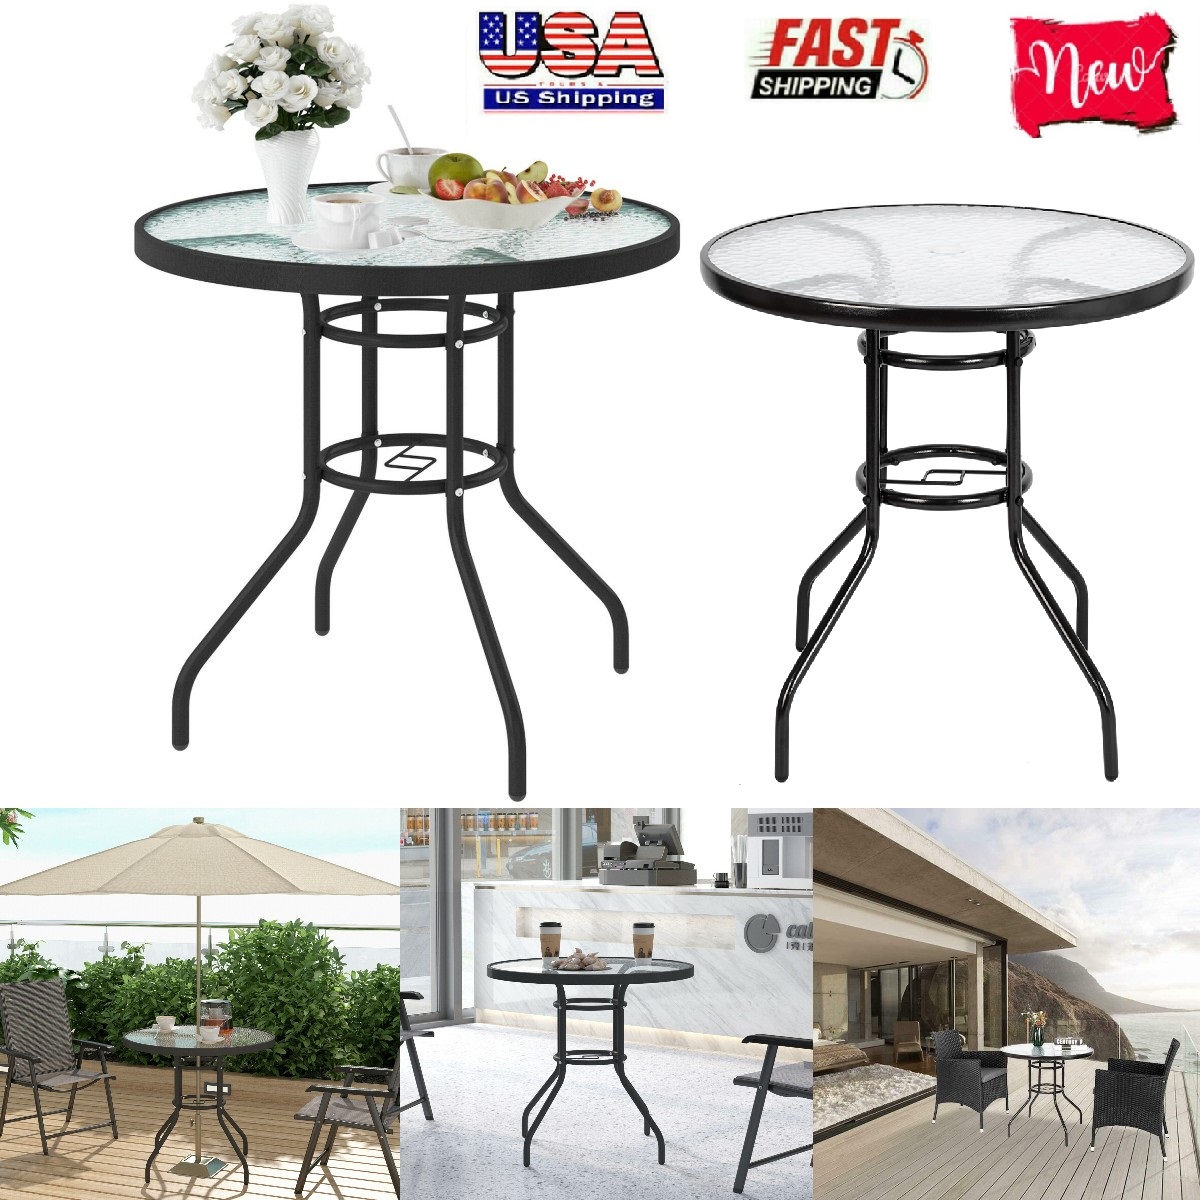 Goorabbit Outdoor Glass Table 32" Outdoor Bistro Table Patio Dining Table Round Side Table Coffee Table Furniture with Umbrella Hole, Metal Frame Water Ripple Glass Top(Black) - image 1 of 8